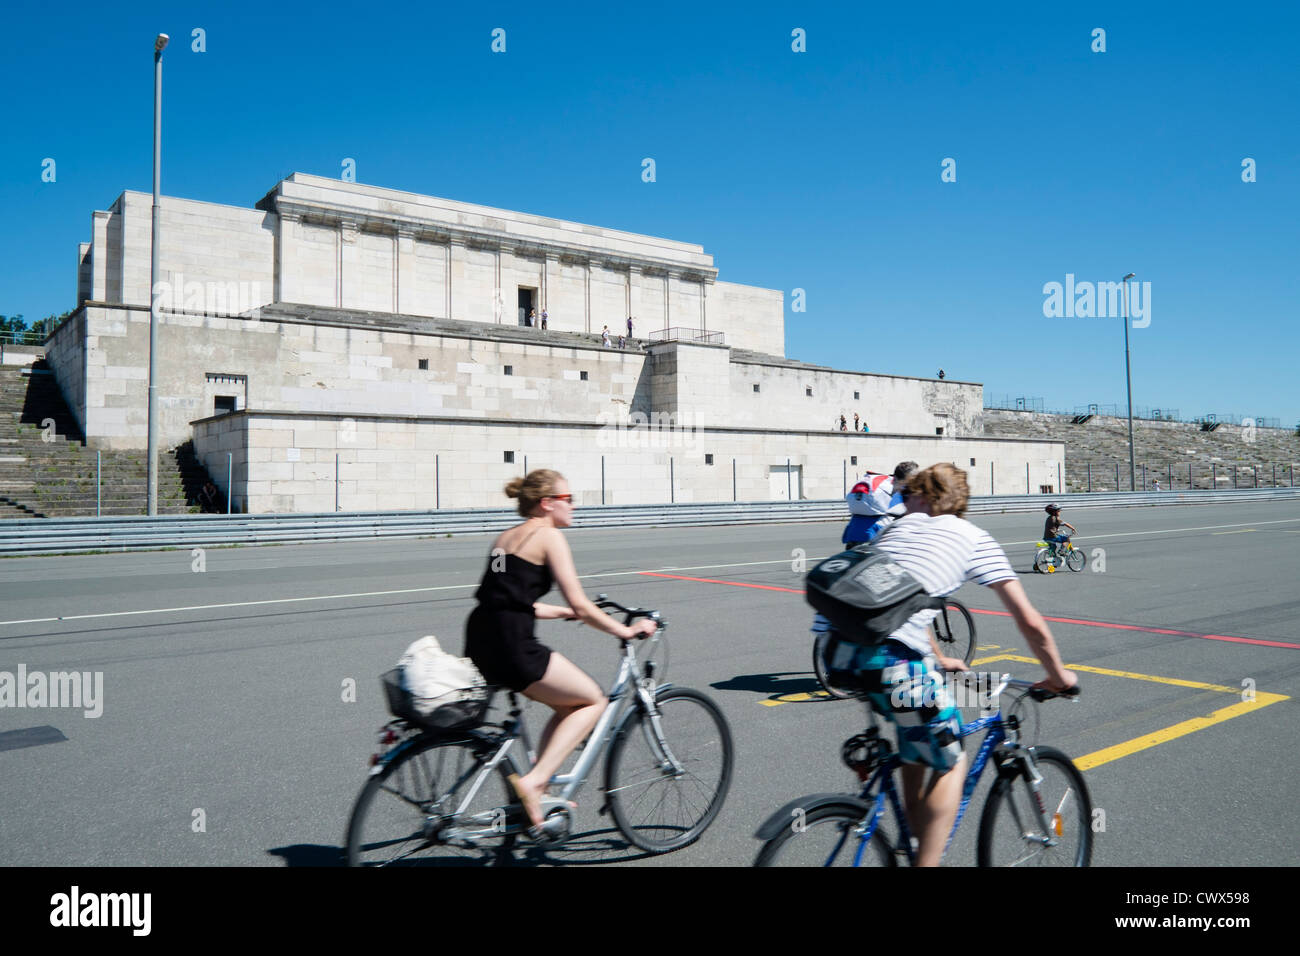 The former Nazi party rally grounds at Zeppelinfeld in Nuremberg in Bavaria Germany Stock Photo